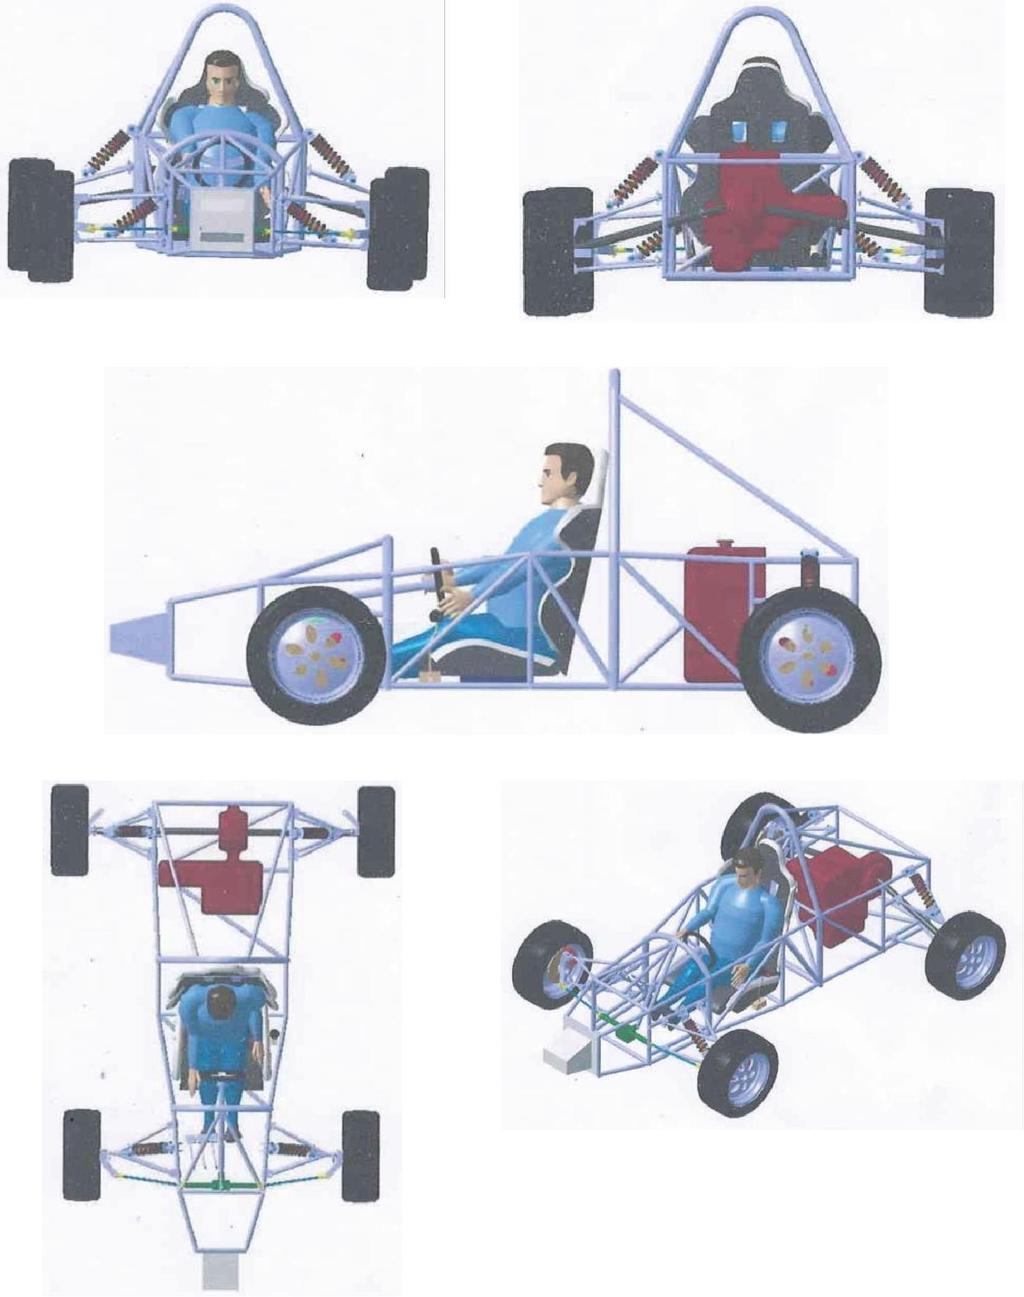 3D VIEWS OF THE VEHICLE